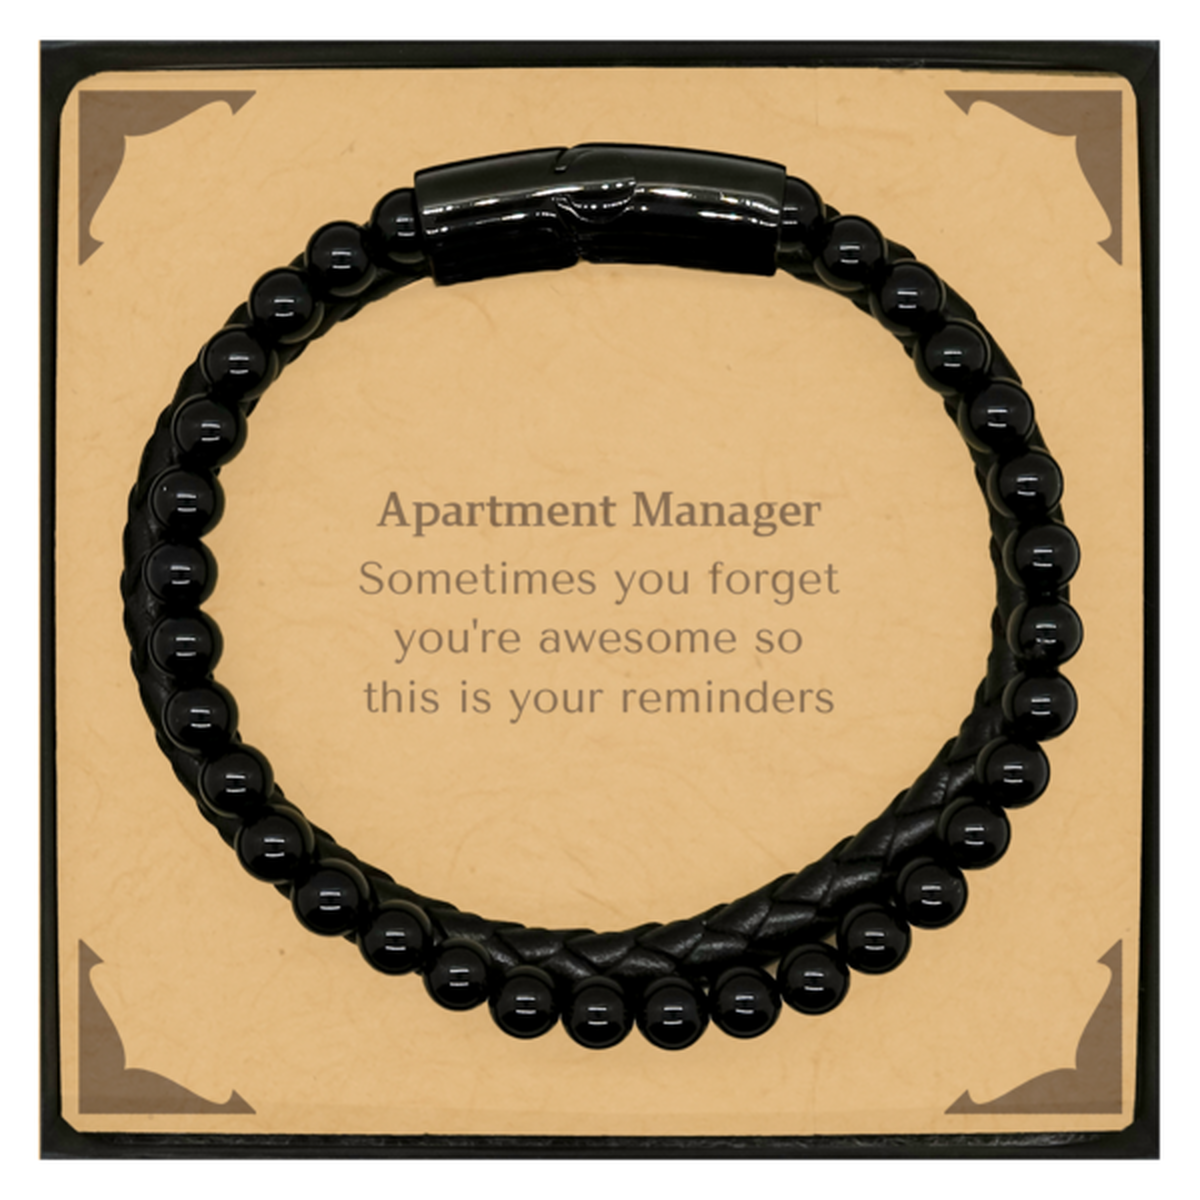 Sentimental Apartment Manager Stone Leather Bracelets, Apartment Manager Sometimes you forget you're awesome so this is your reminders, Graduation Christmas Birthday Gifts for Apartment Manager, Men, Women, Coworkers